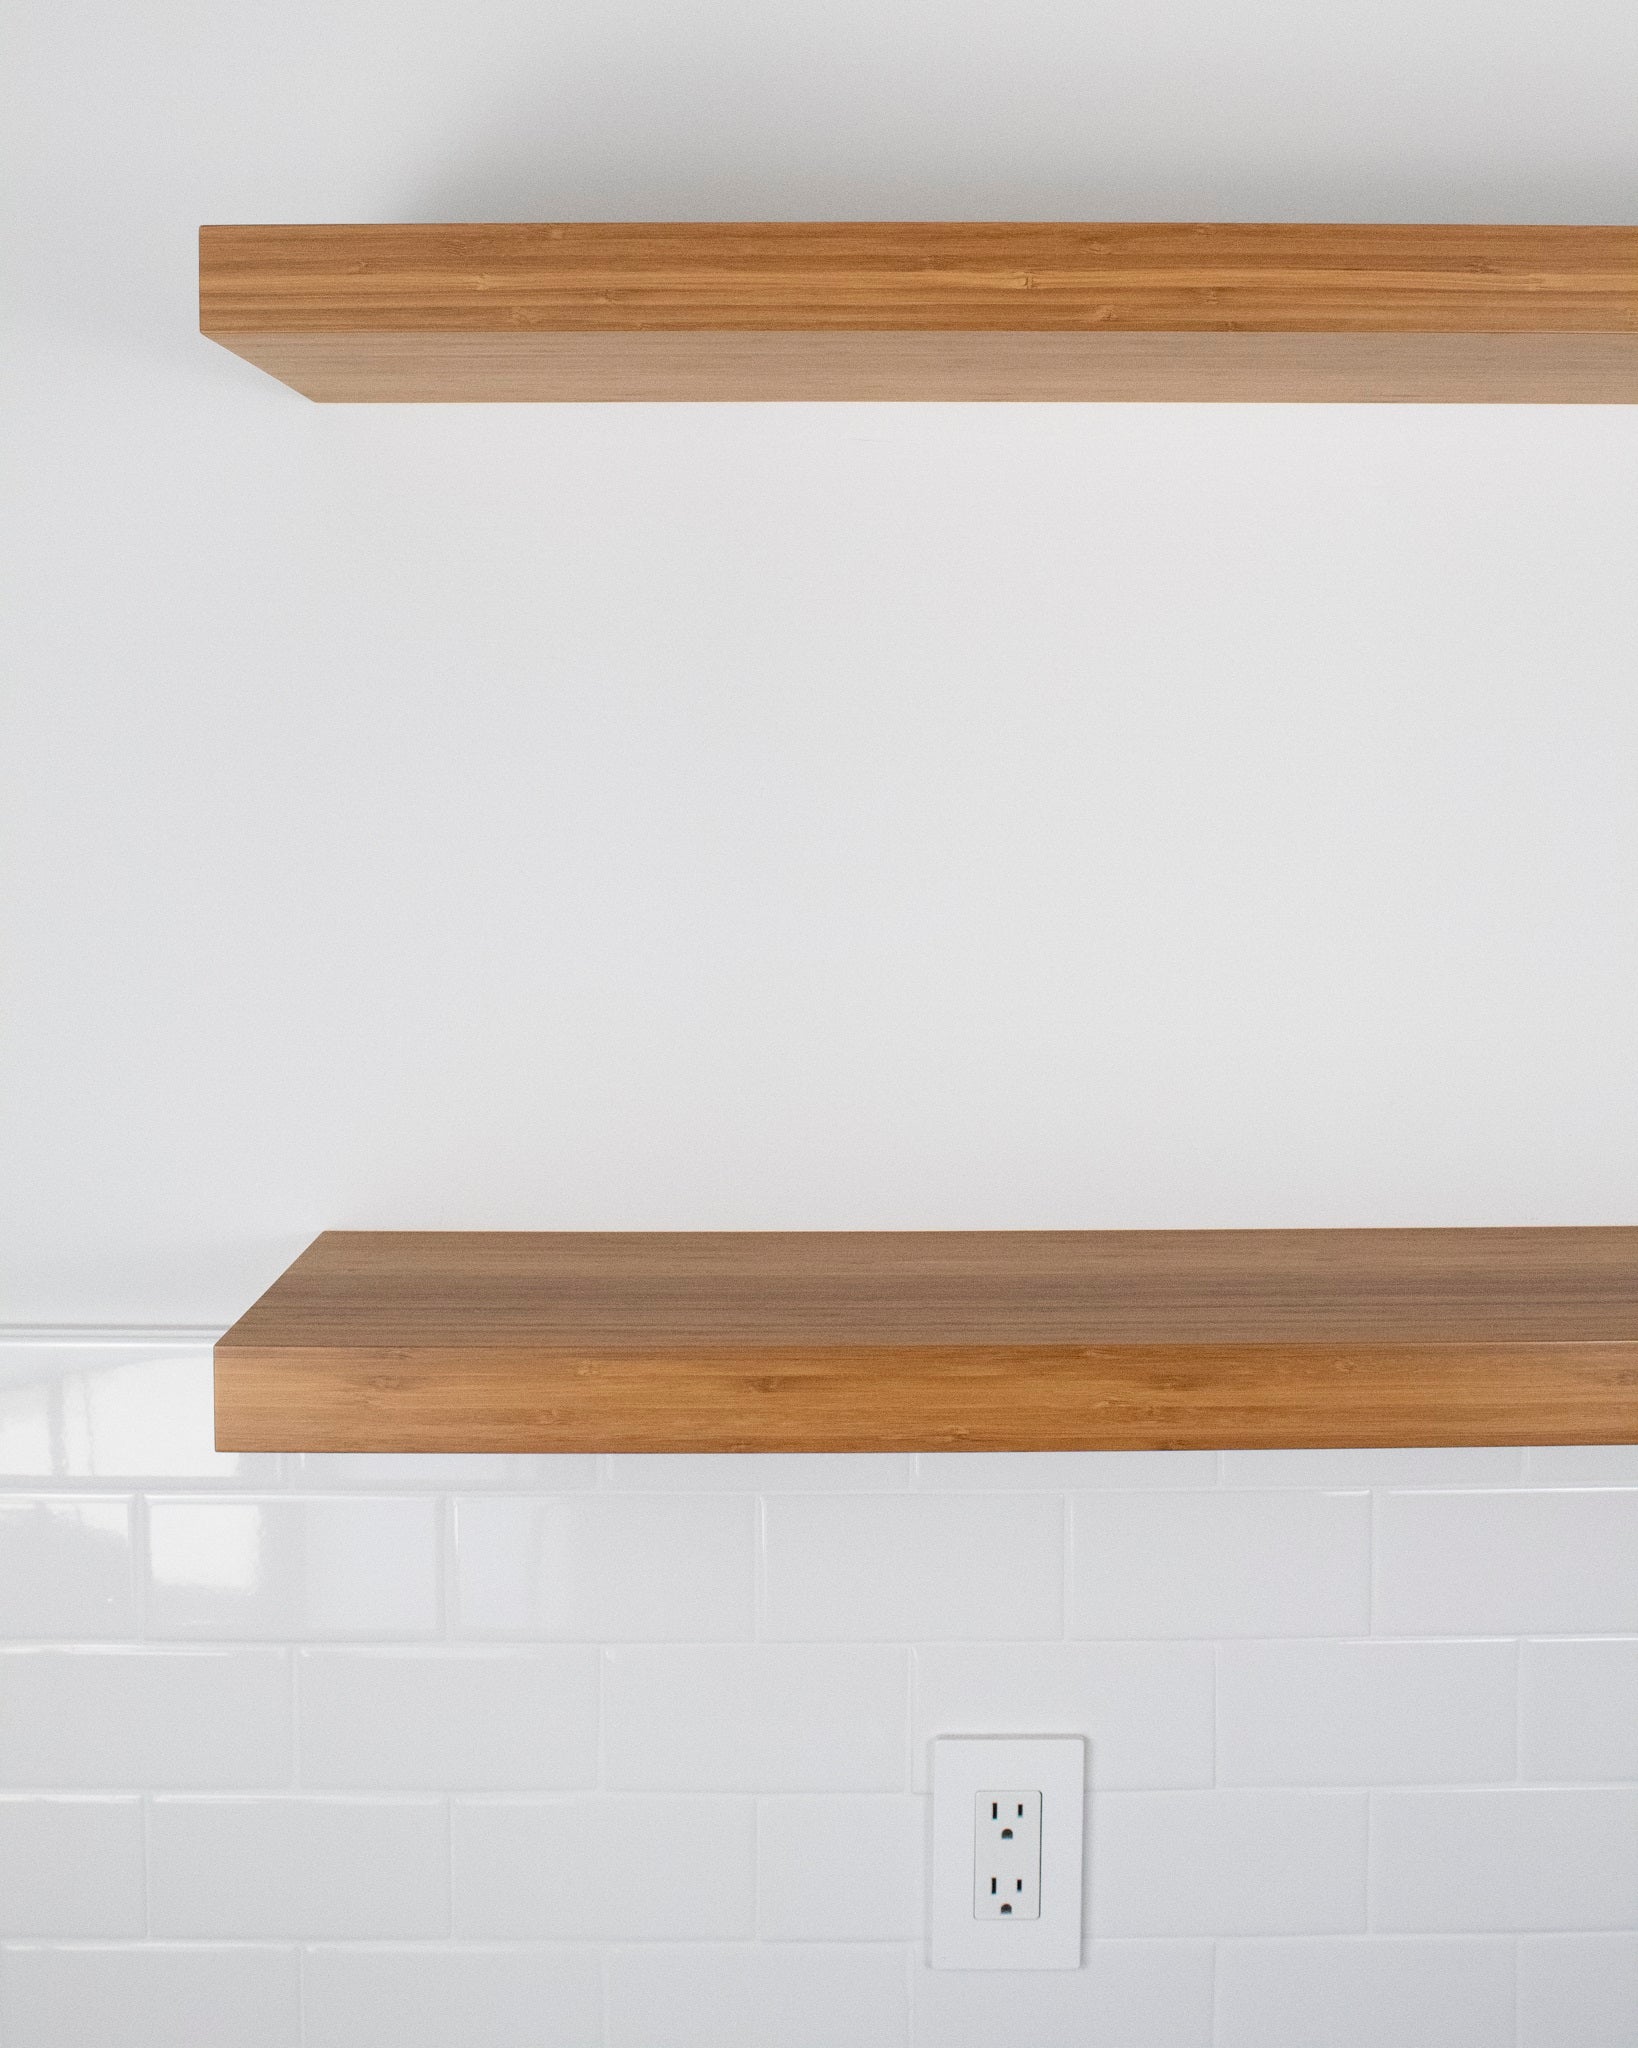 Bamboo Floating Shelves 1.75" thick